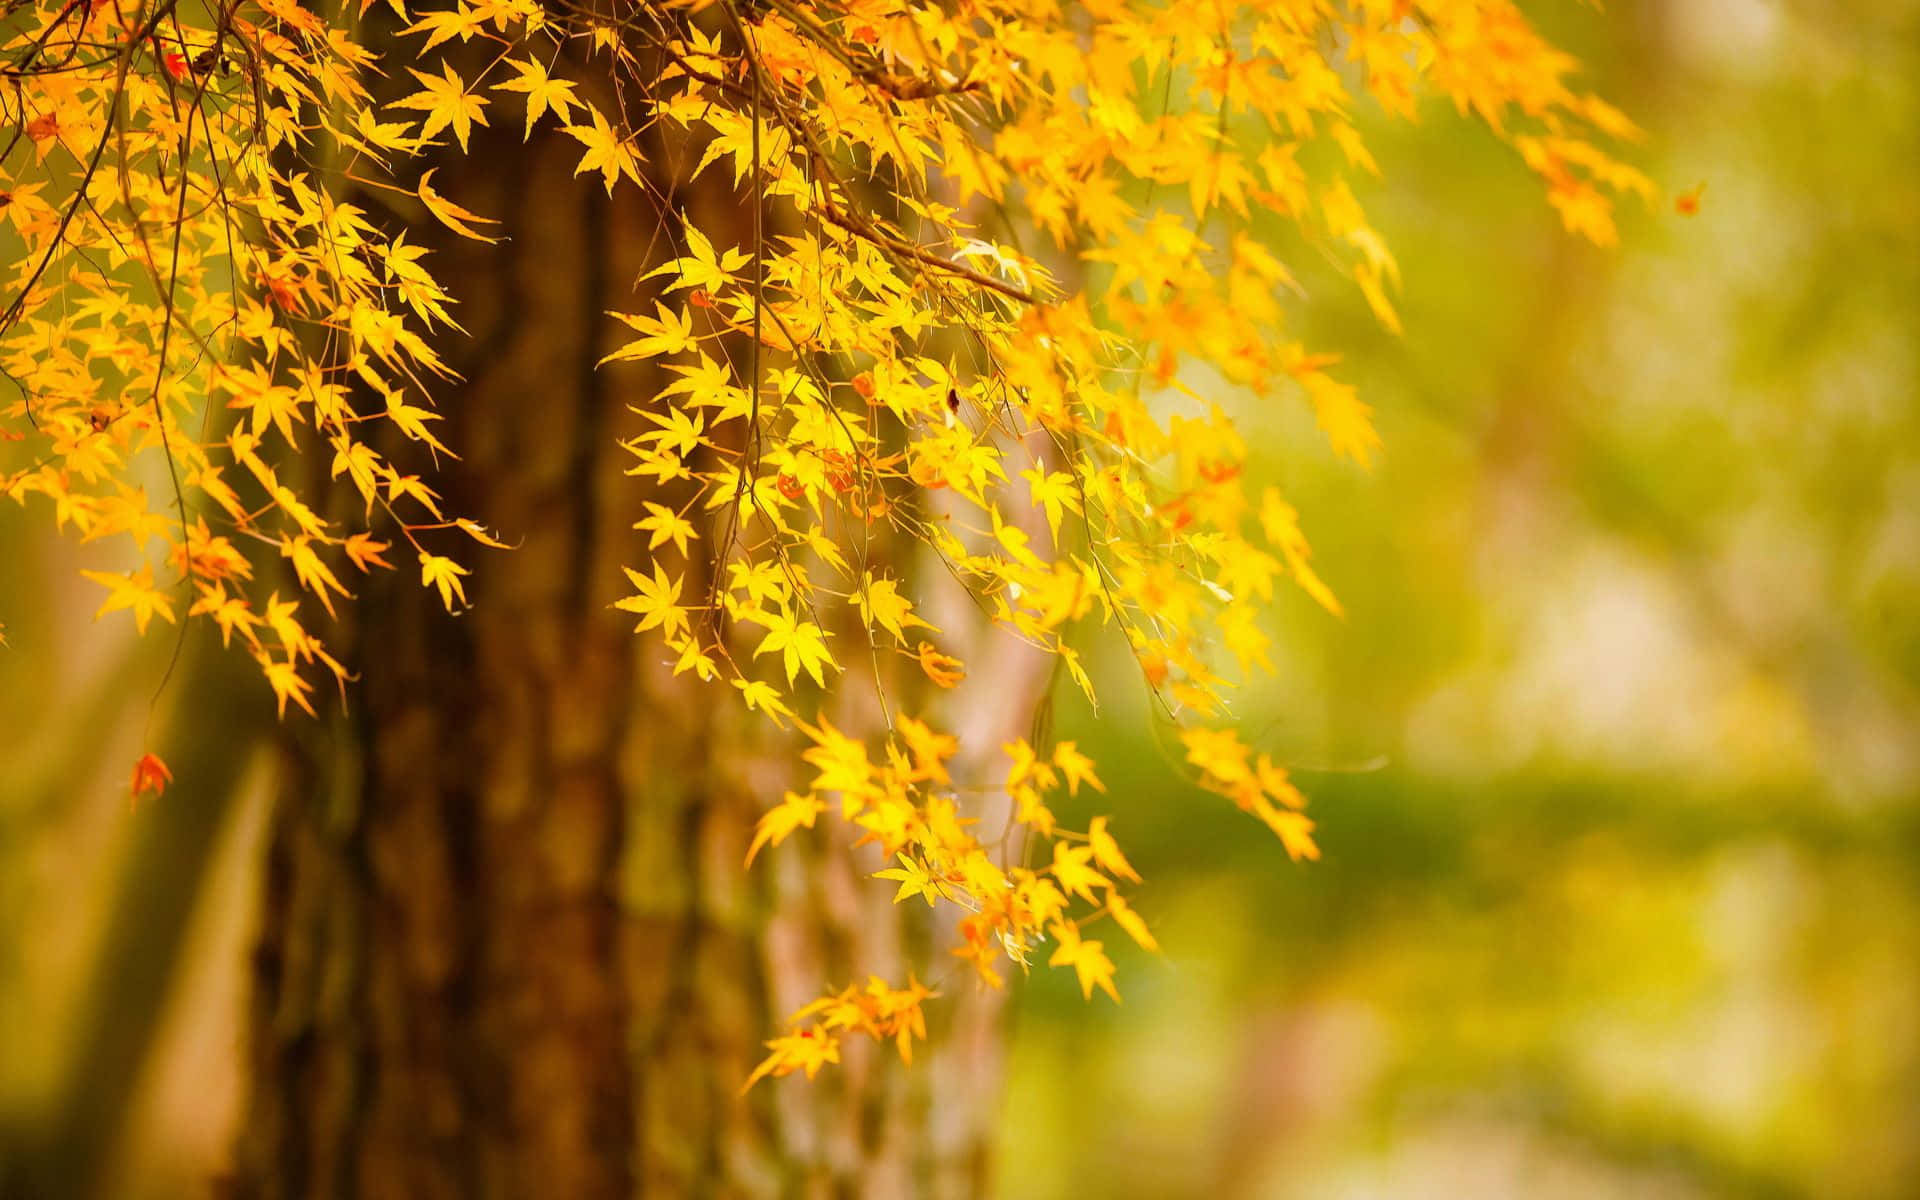 Experience the fullness of fall with this stunning desktop wallpaper.